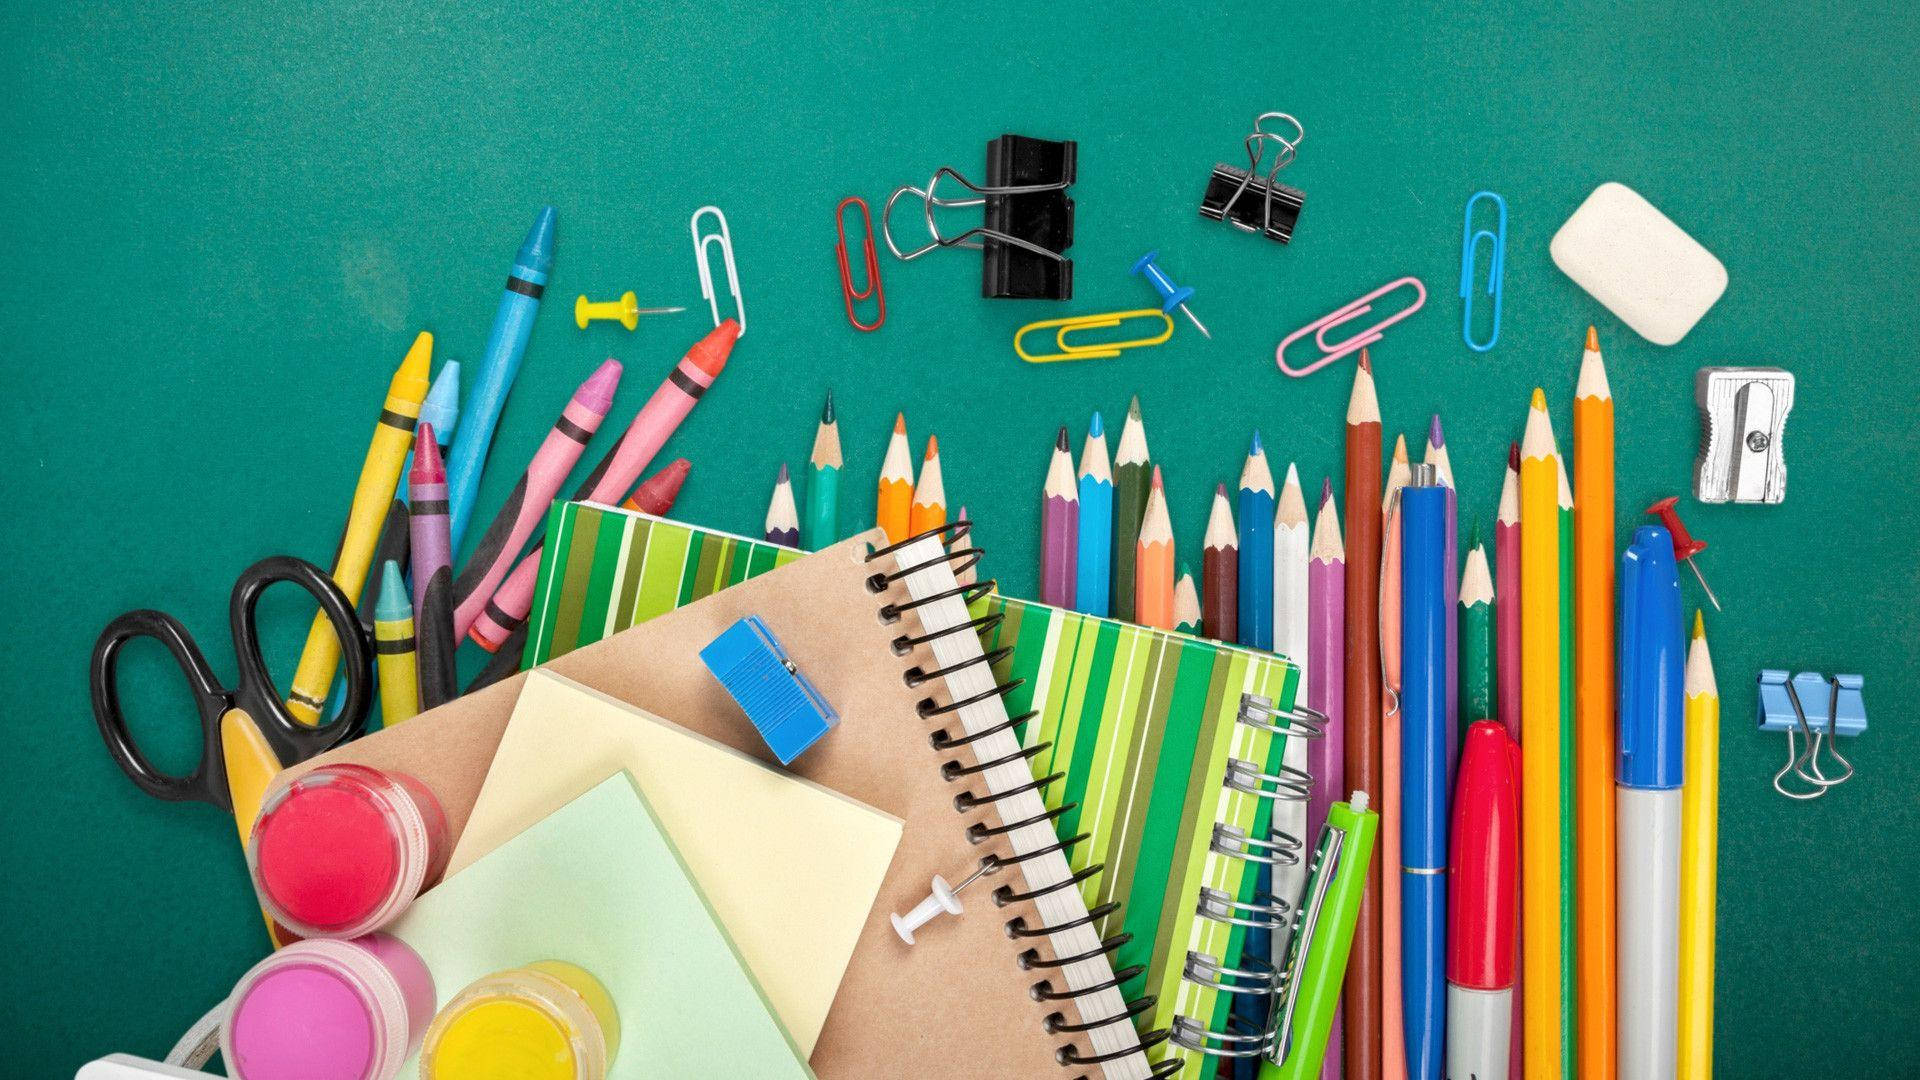 Pencils, Notebooks, And Scissors Education Background